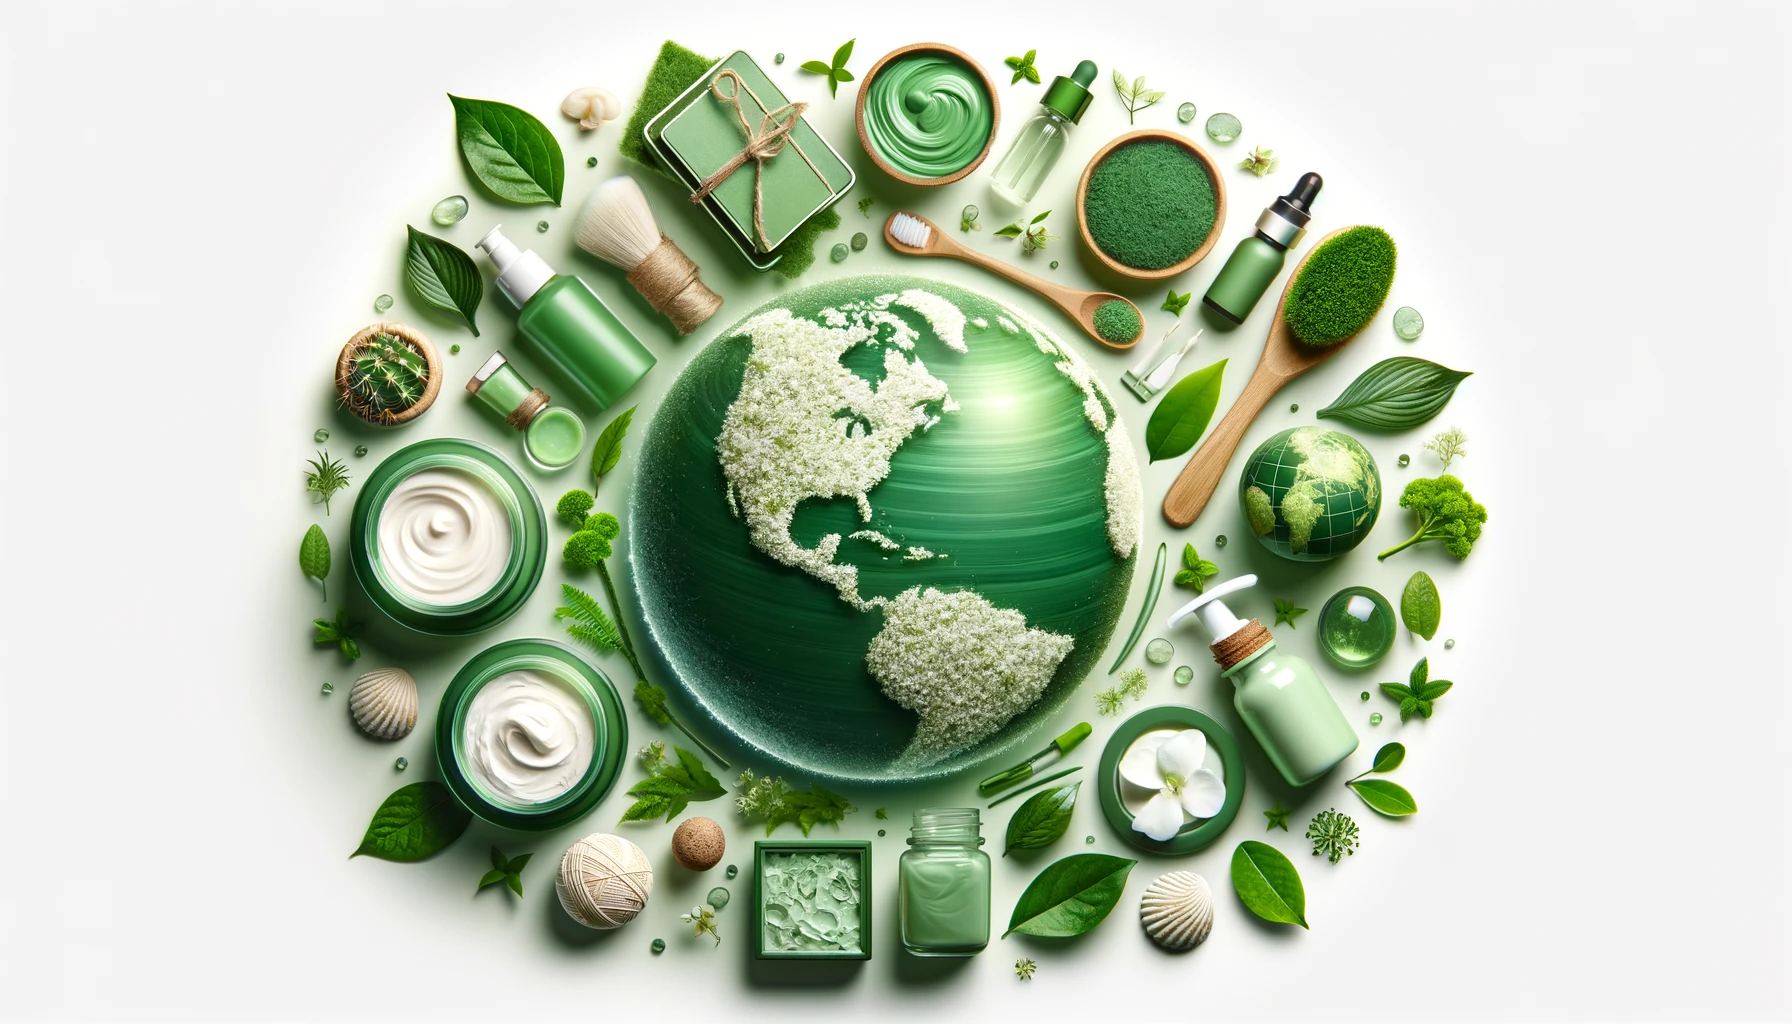  Eco-friendly skincare products and natural ingredients for Sustainable Skincare on Healthy Life - New Start